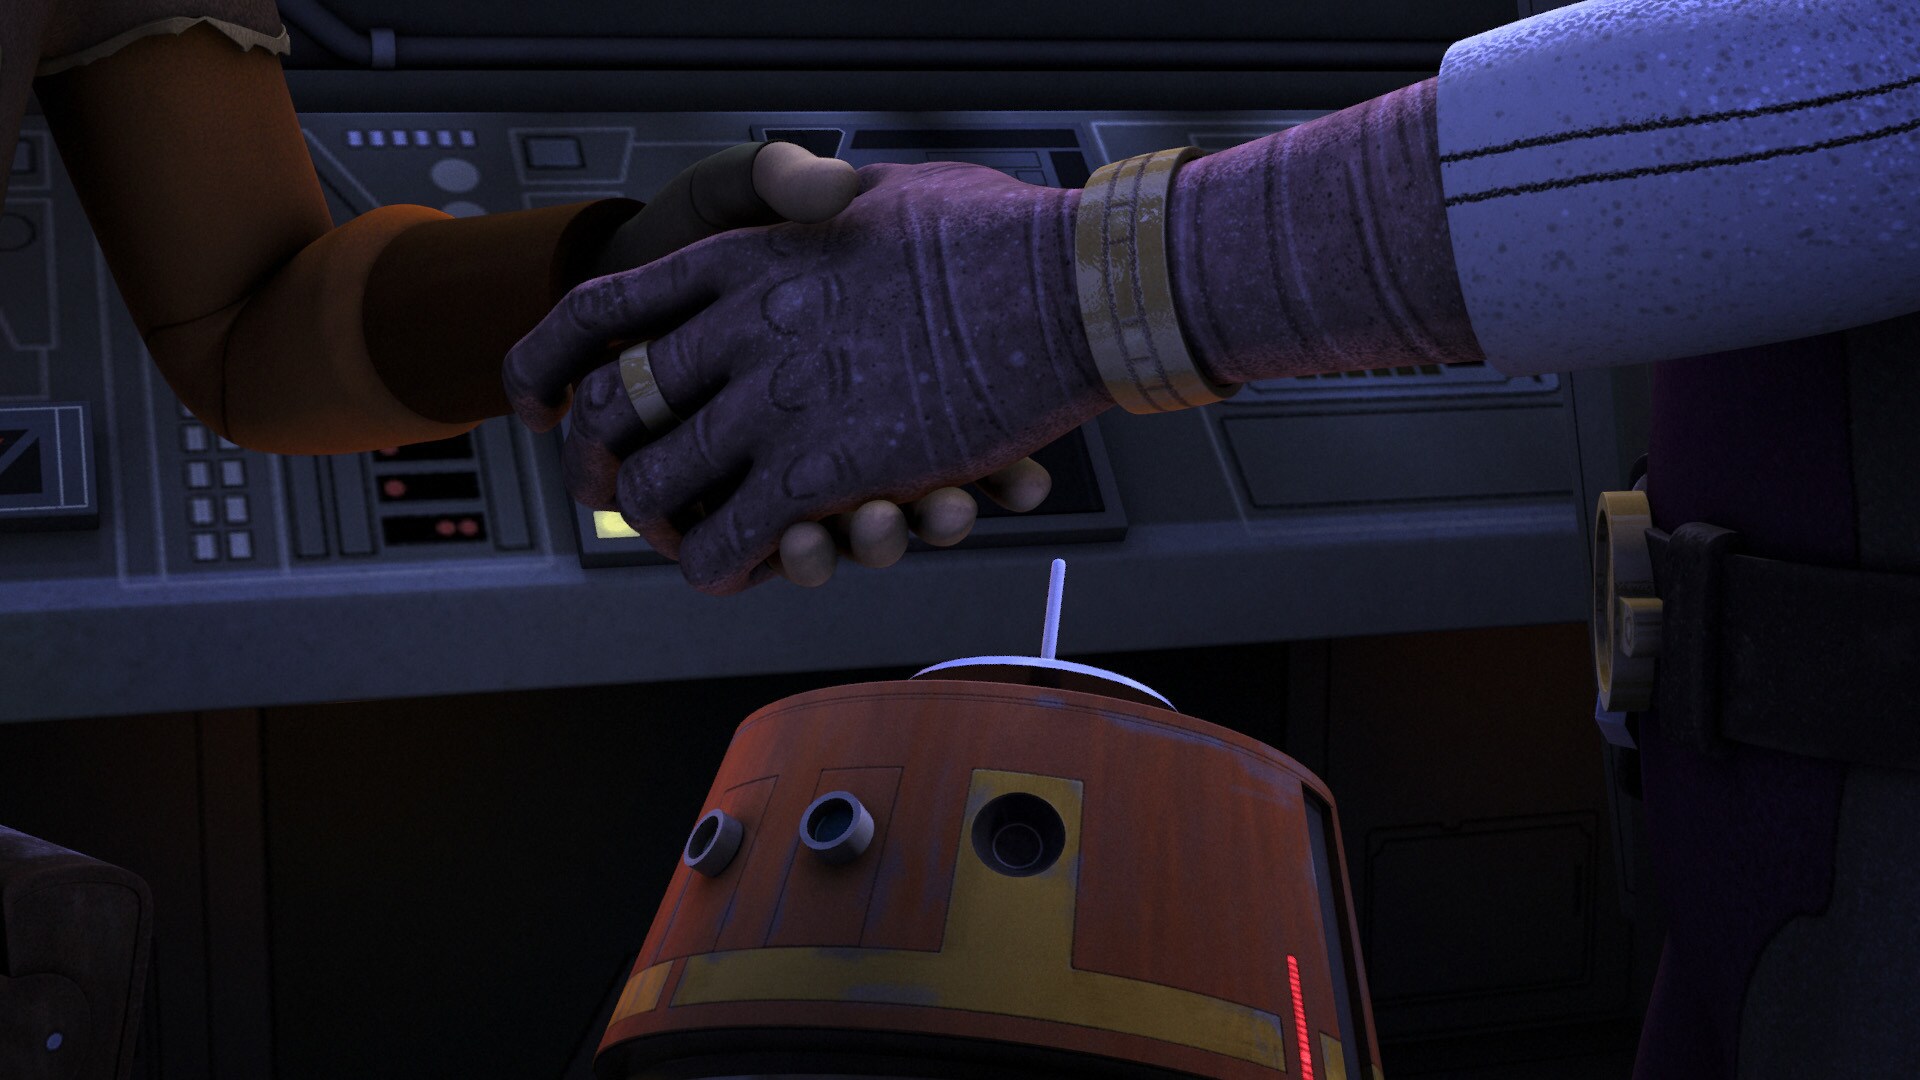 Still pushing for Ezra to join him, Hondo reveals that he has a large shipment of power generator...